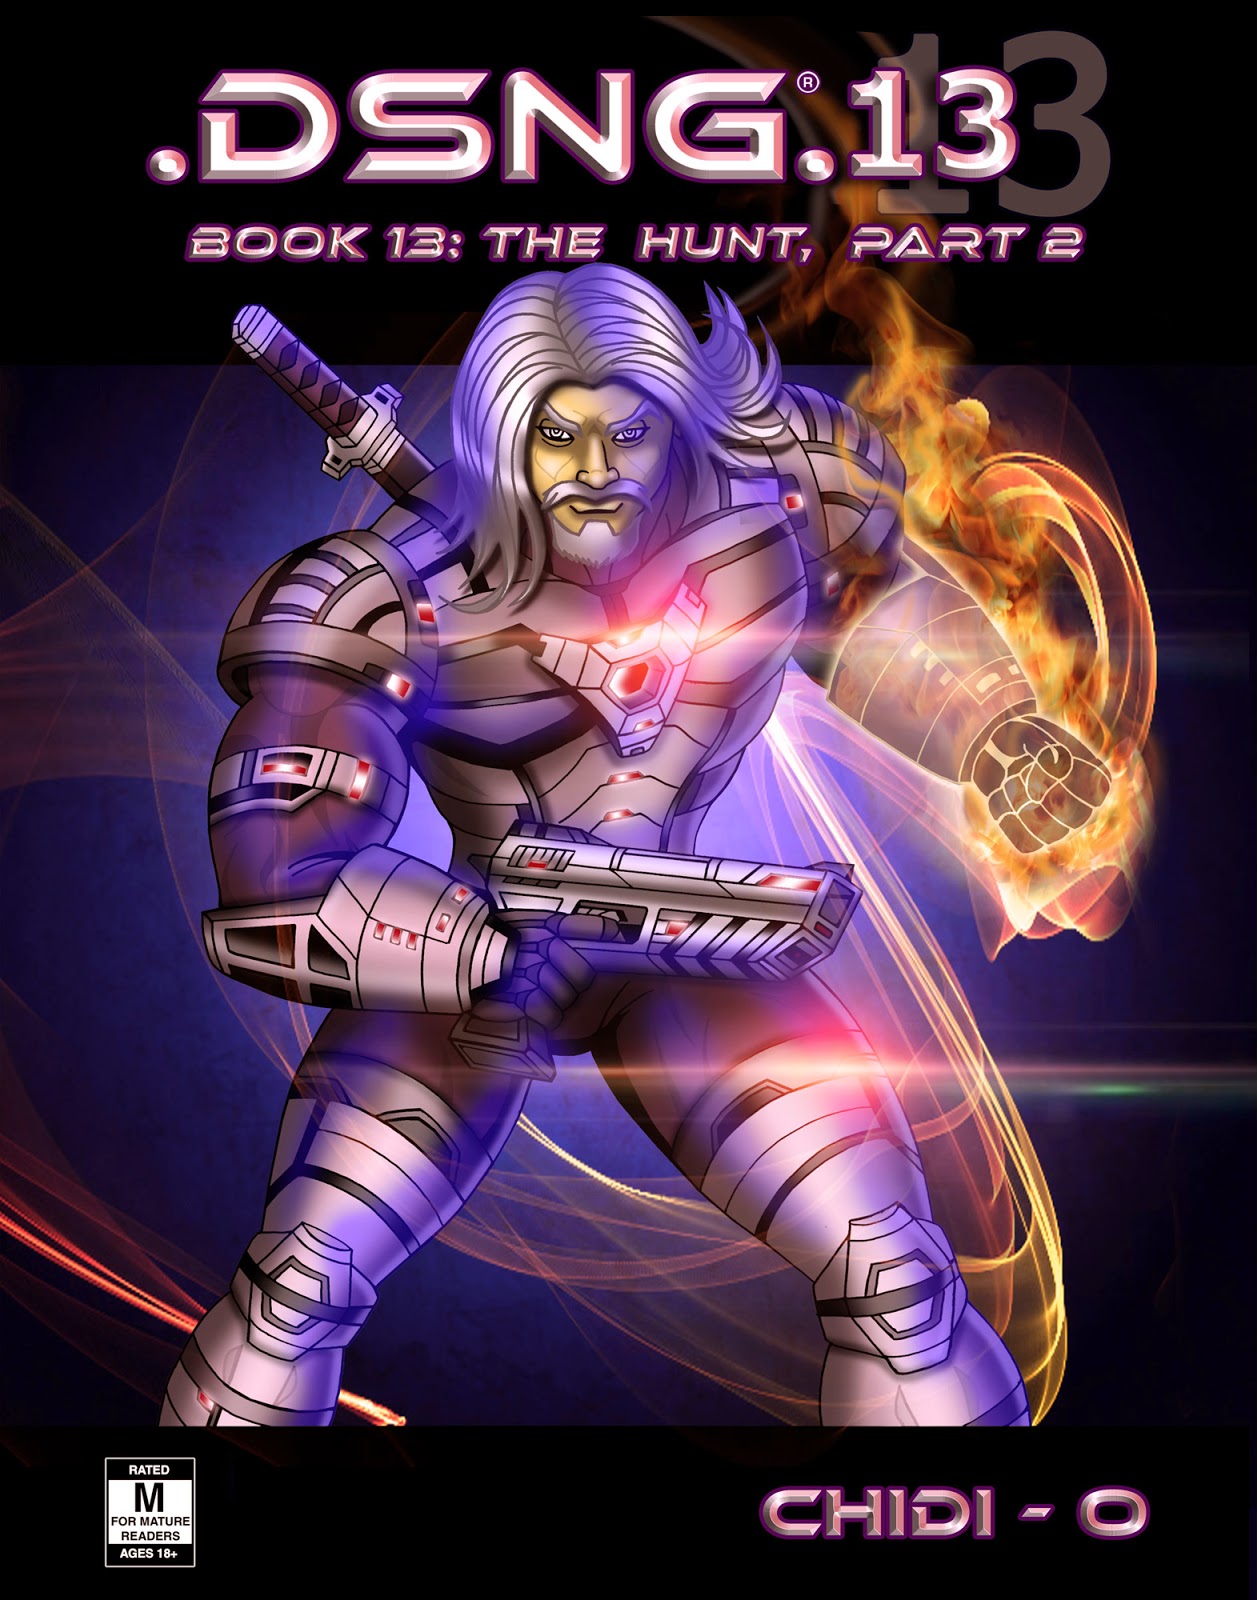 Dsng S Sci Fi Megaverse Dsng Book 13 [the Hunt Part 2] Has Been Launched At Amazon